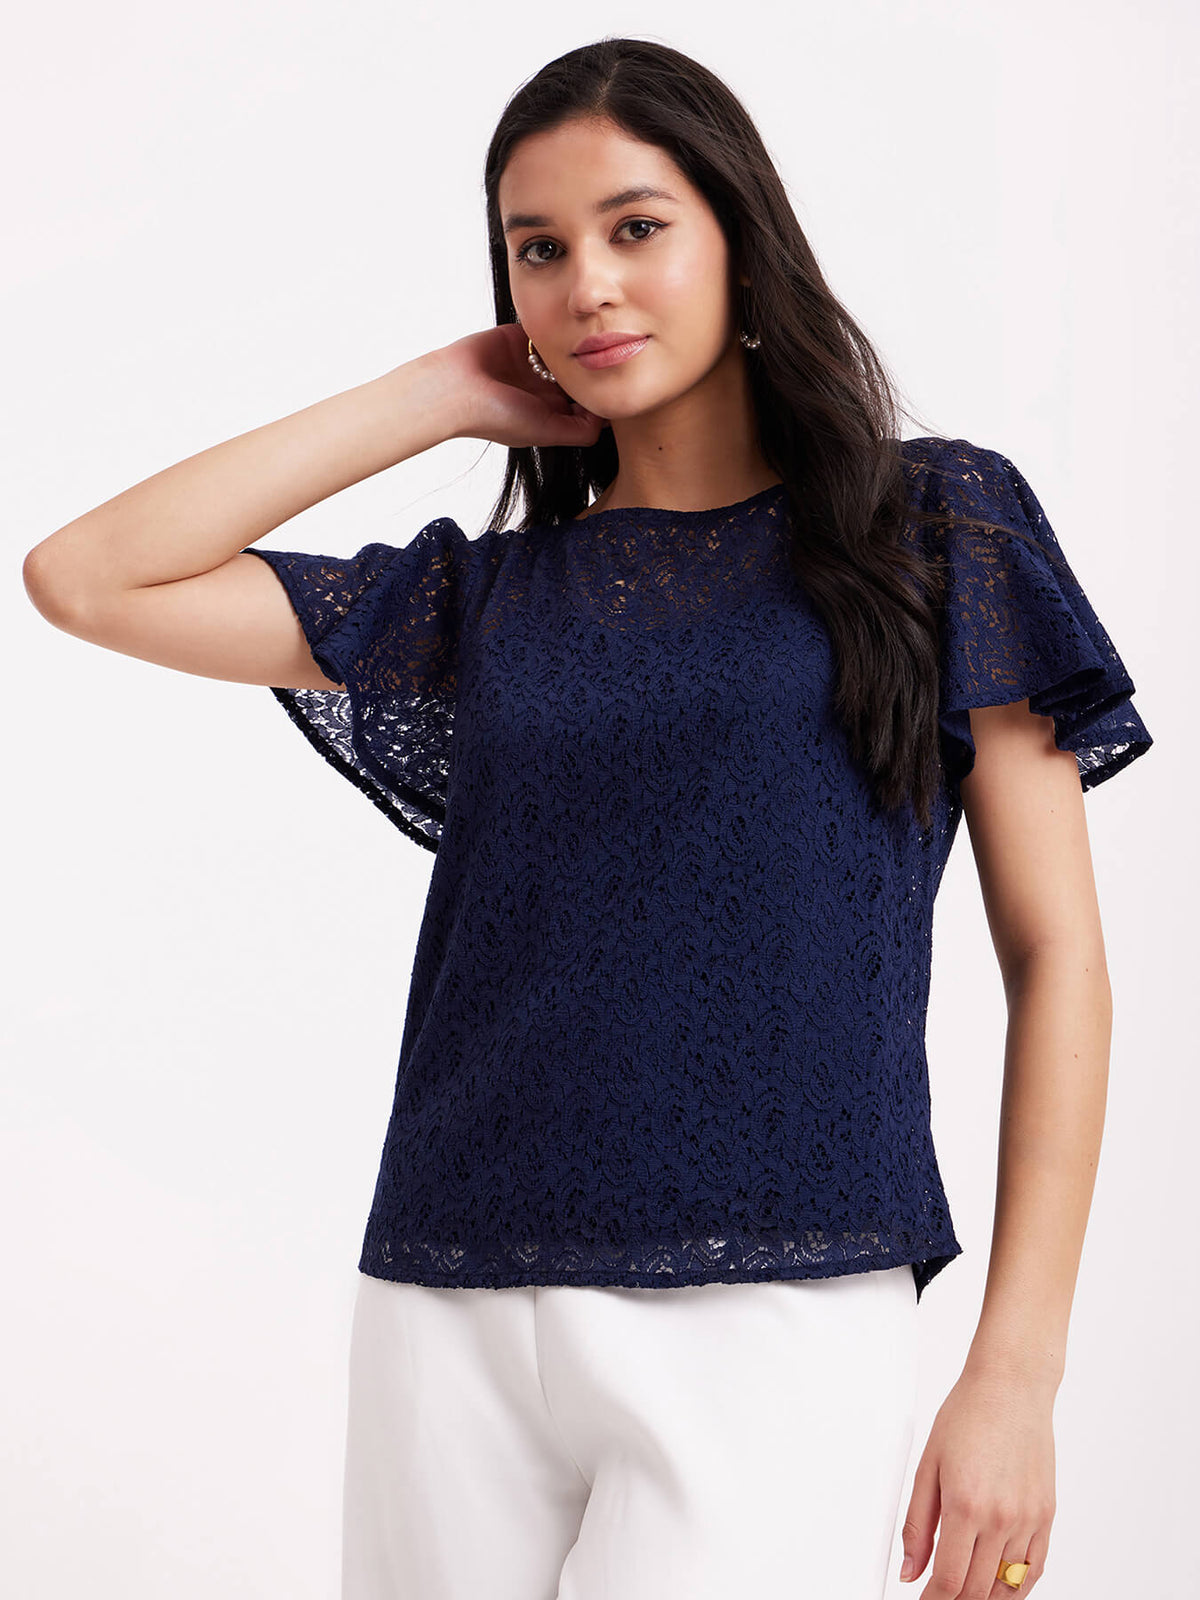 Bell Sleeves Lace Top - Navy Blue